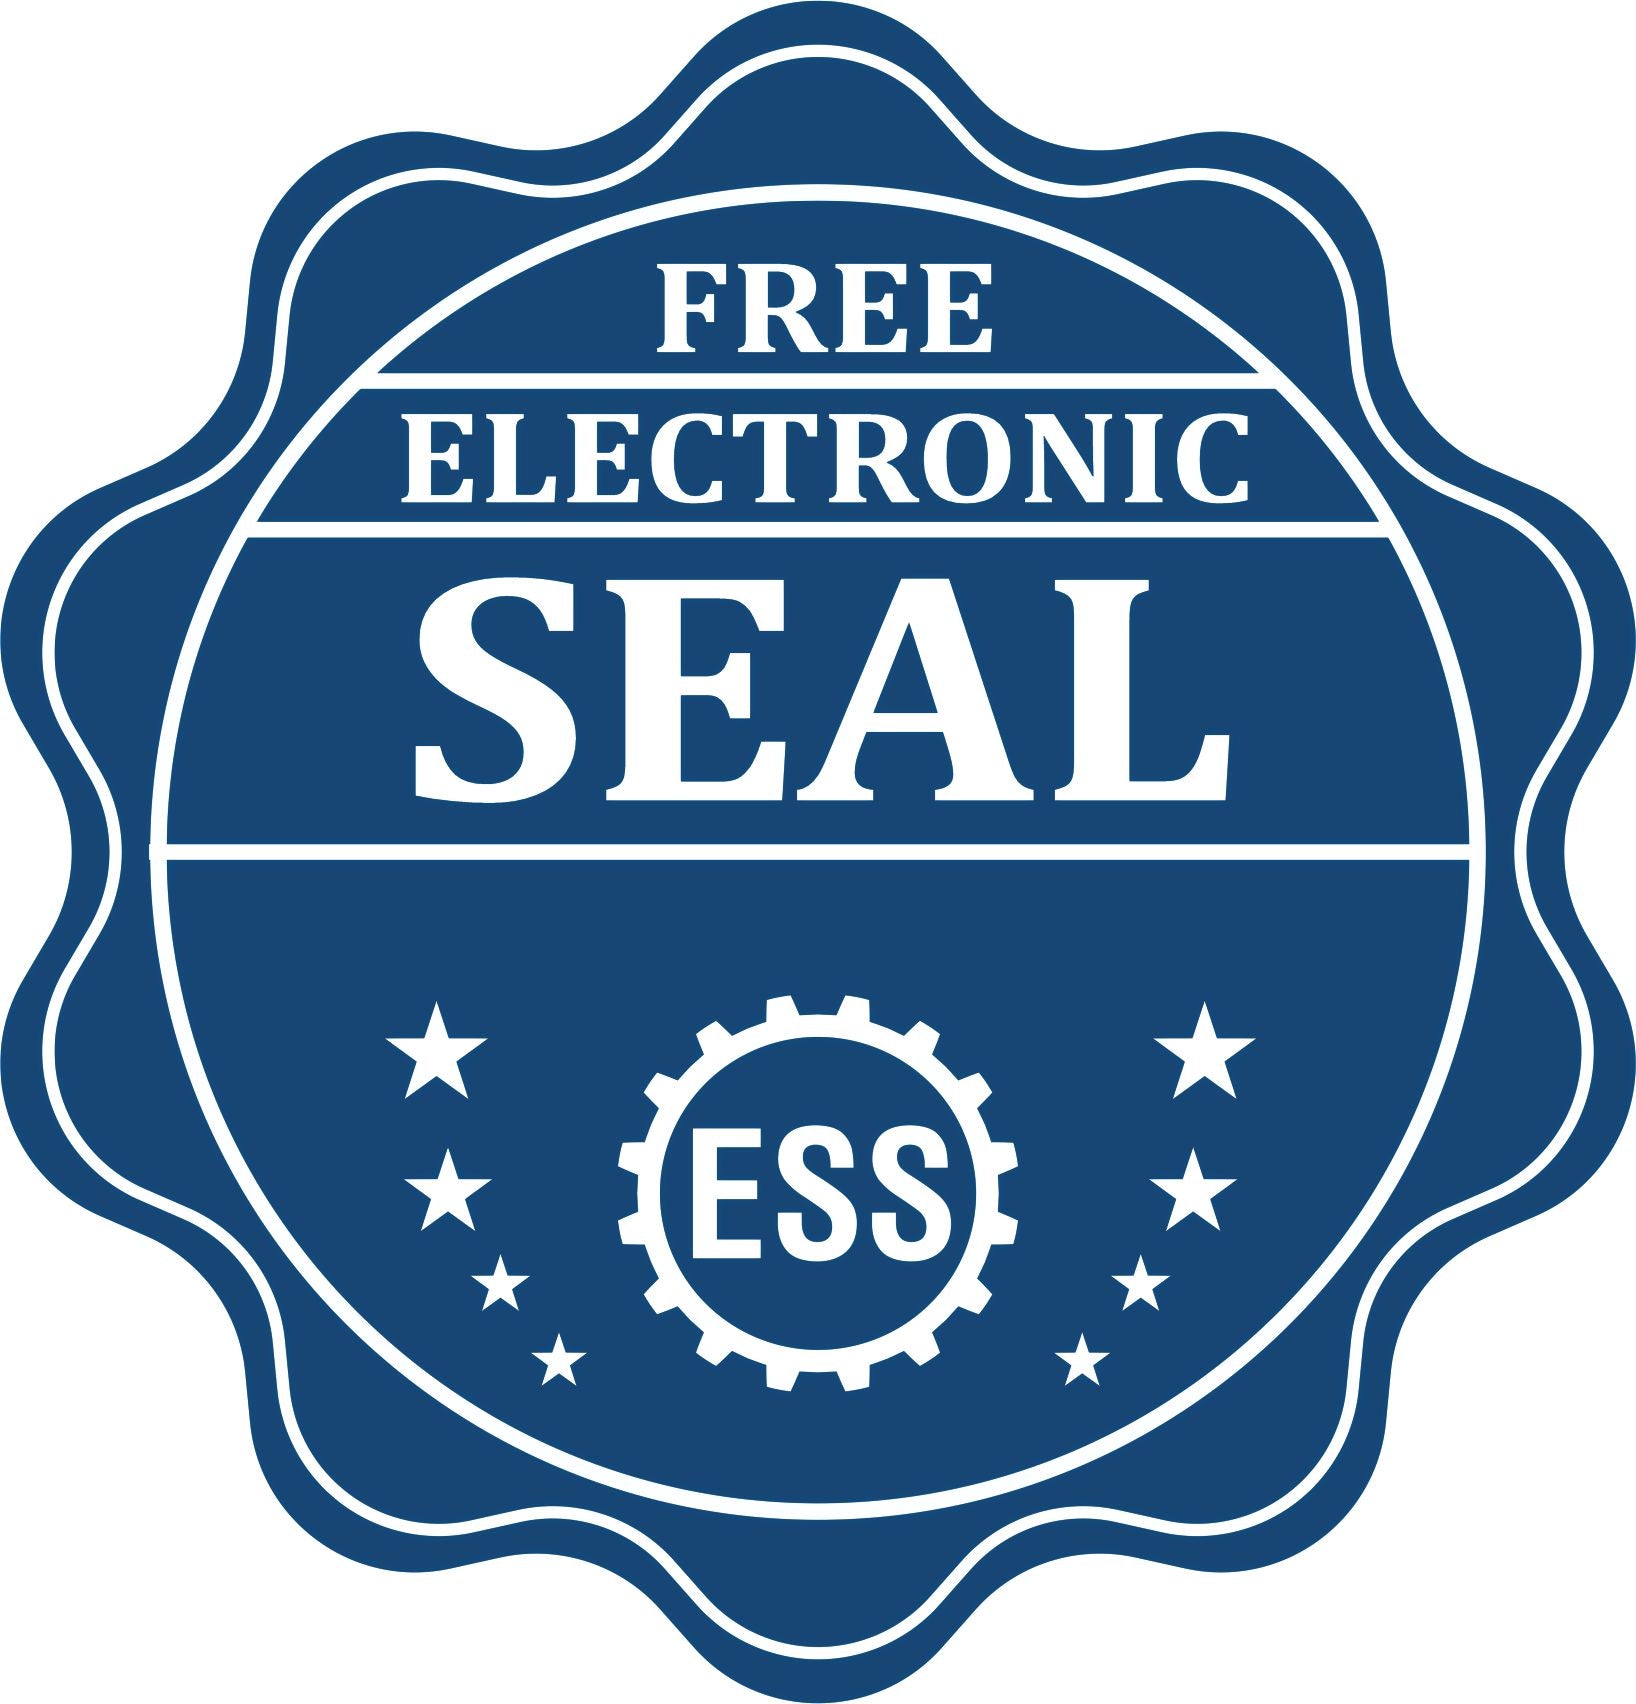 A badge showing a free electronic seal for the Gift Guam Landscape Architect Seal with stars and the ESS gear on the emblem.